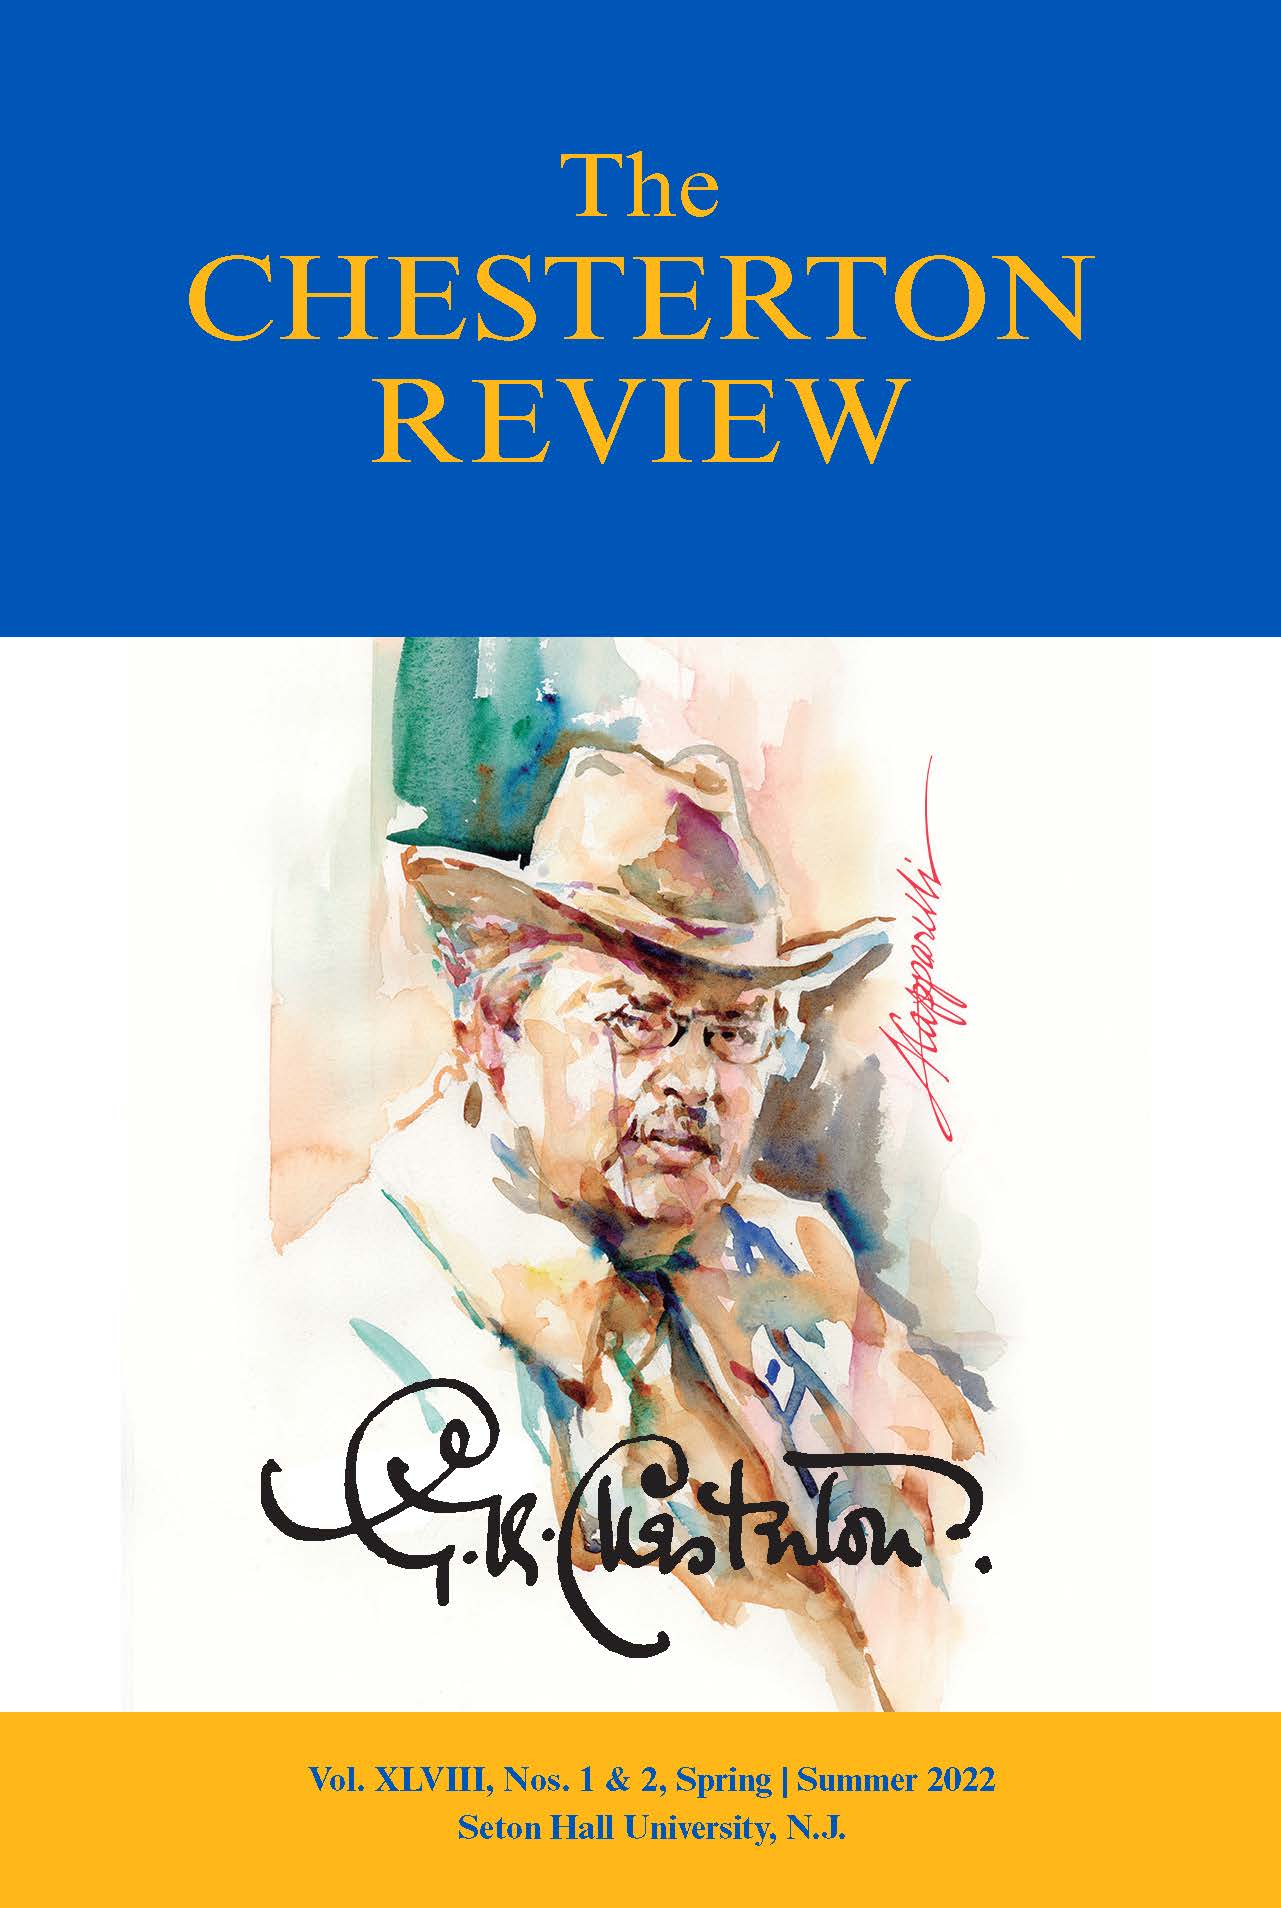 New Issue of “The Chesterton Review”